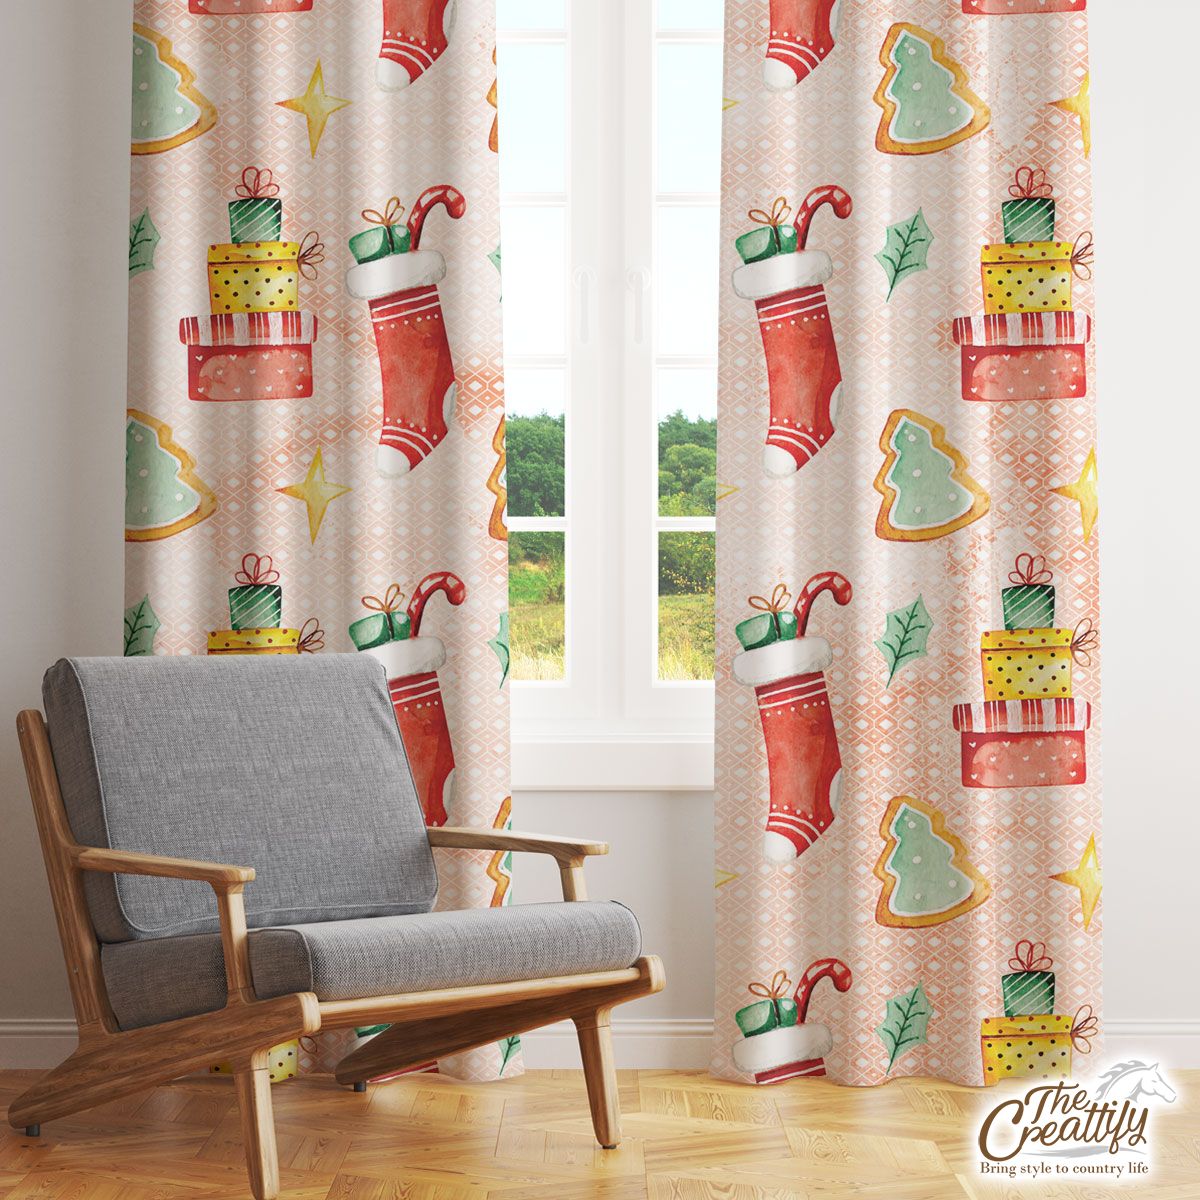 Gingerbread, Christmas Tree, Red Socks With Candy Canes Window Curtain